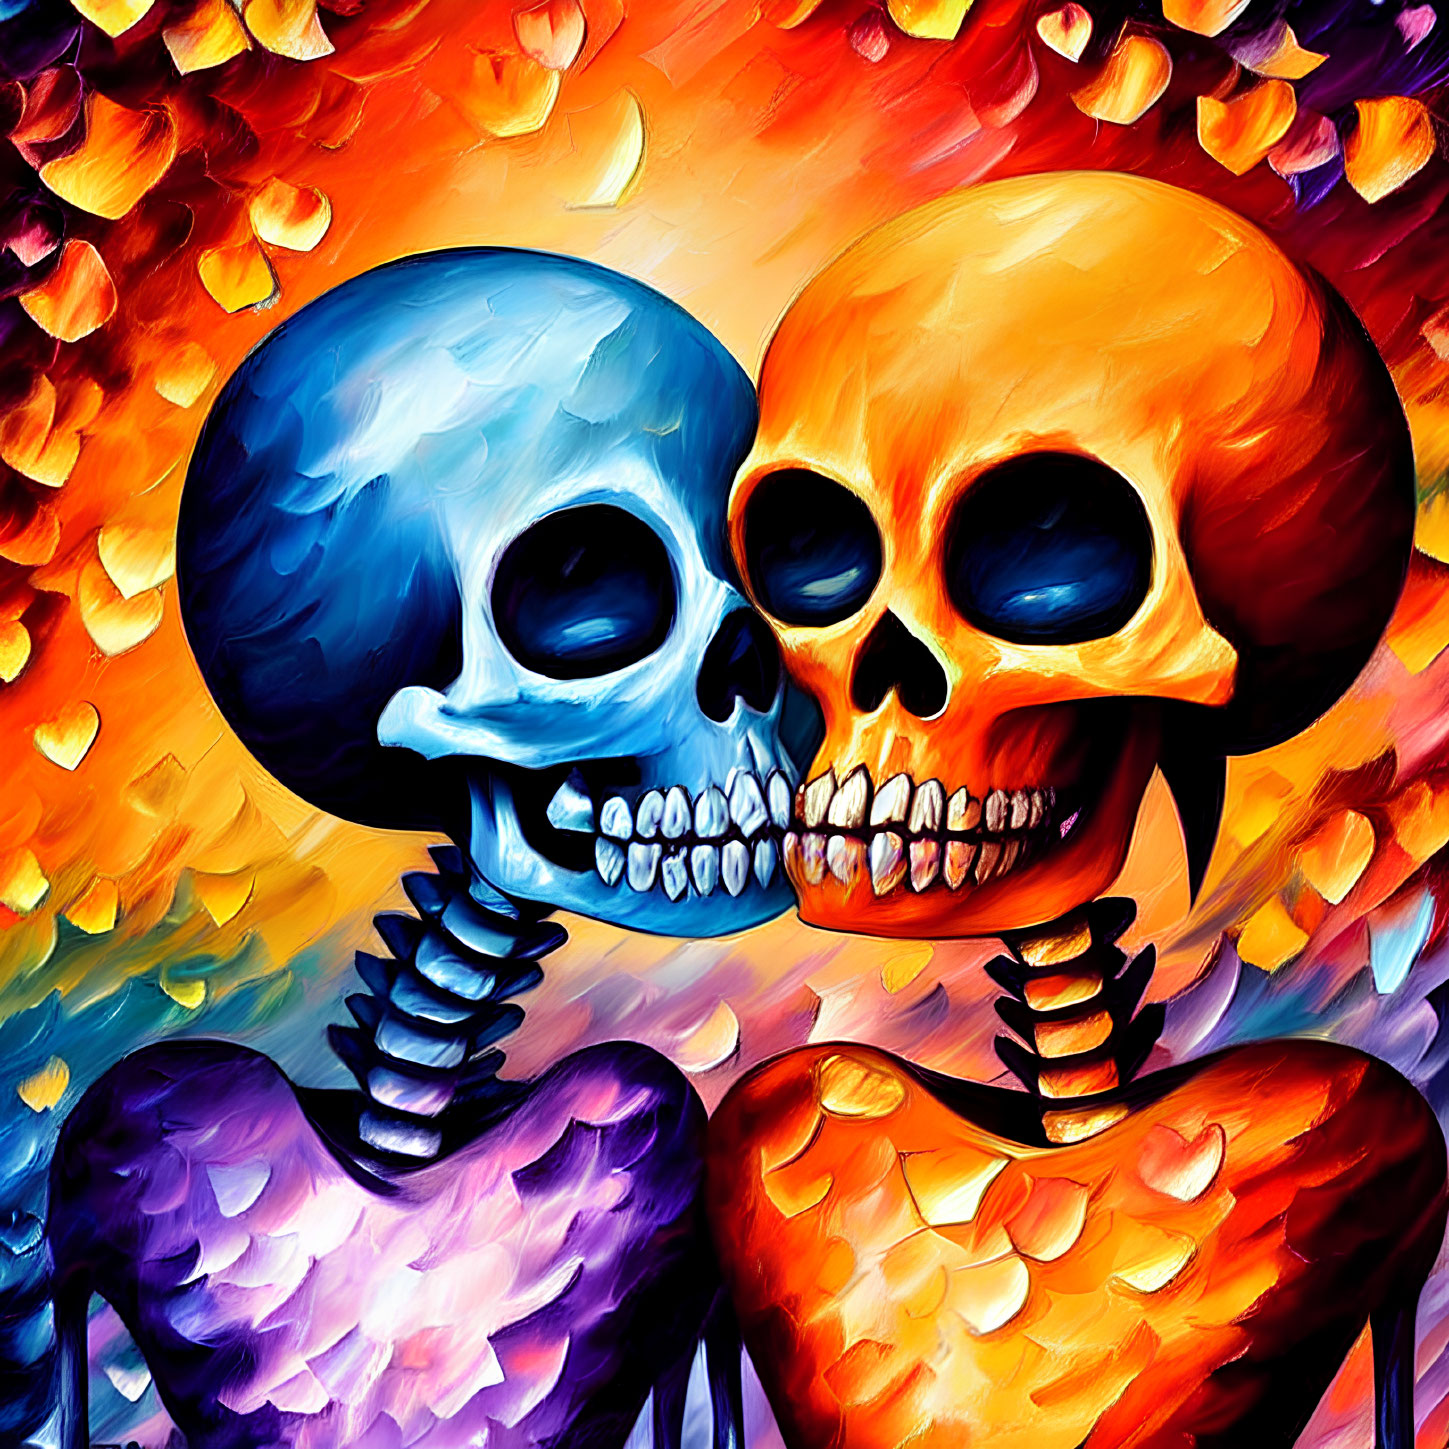 Colorful Stylized Skeletons Embracing with Heart-Shaped Eyes